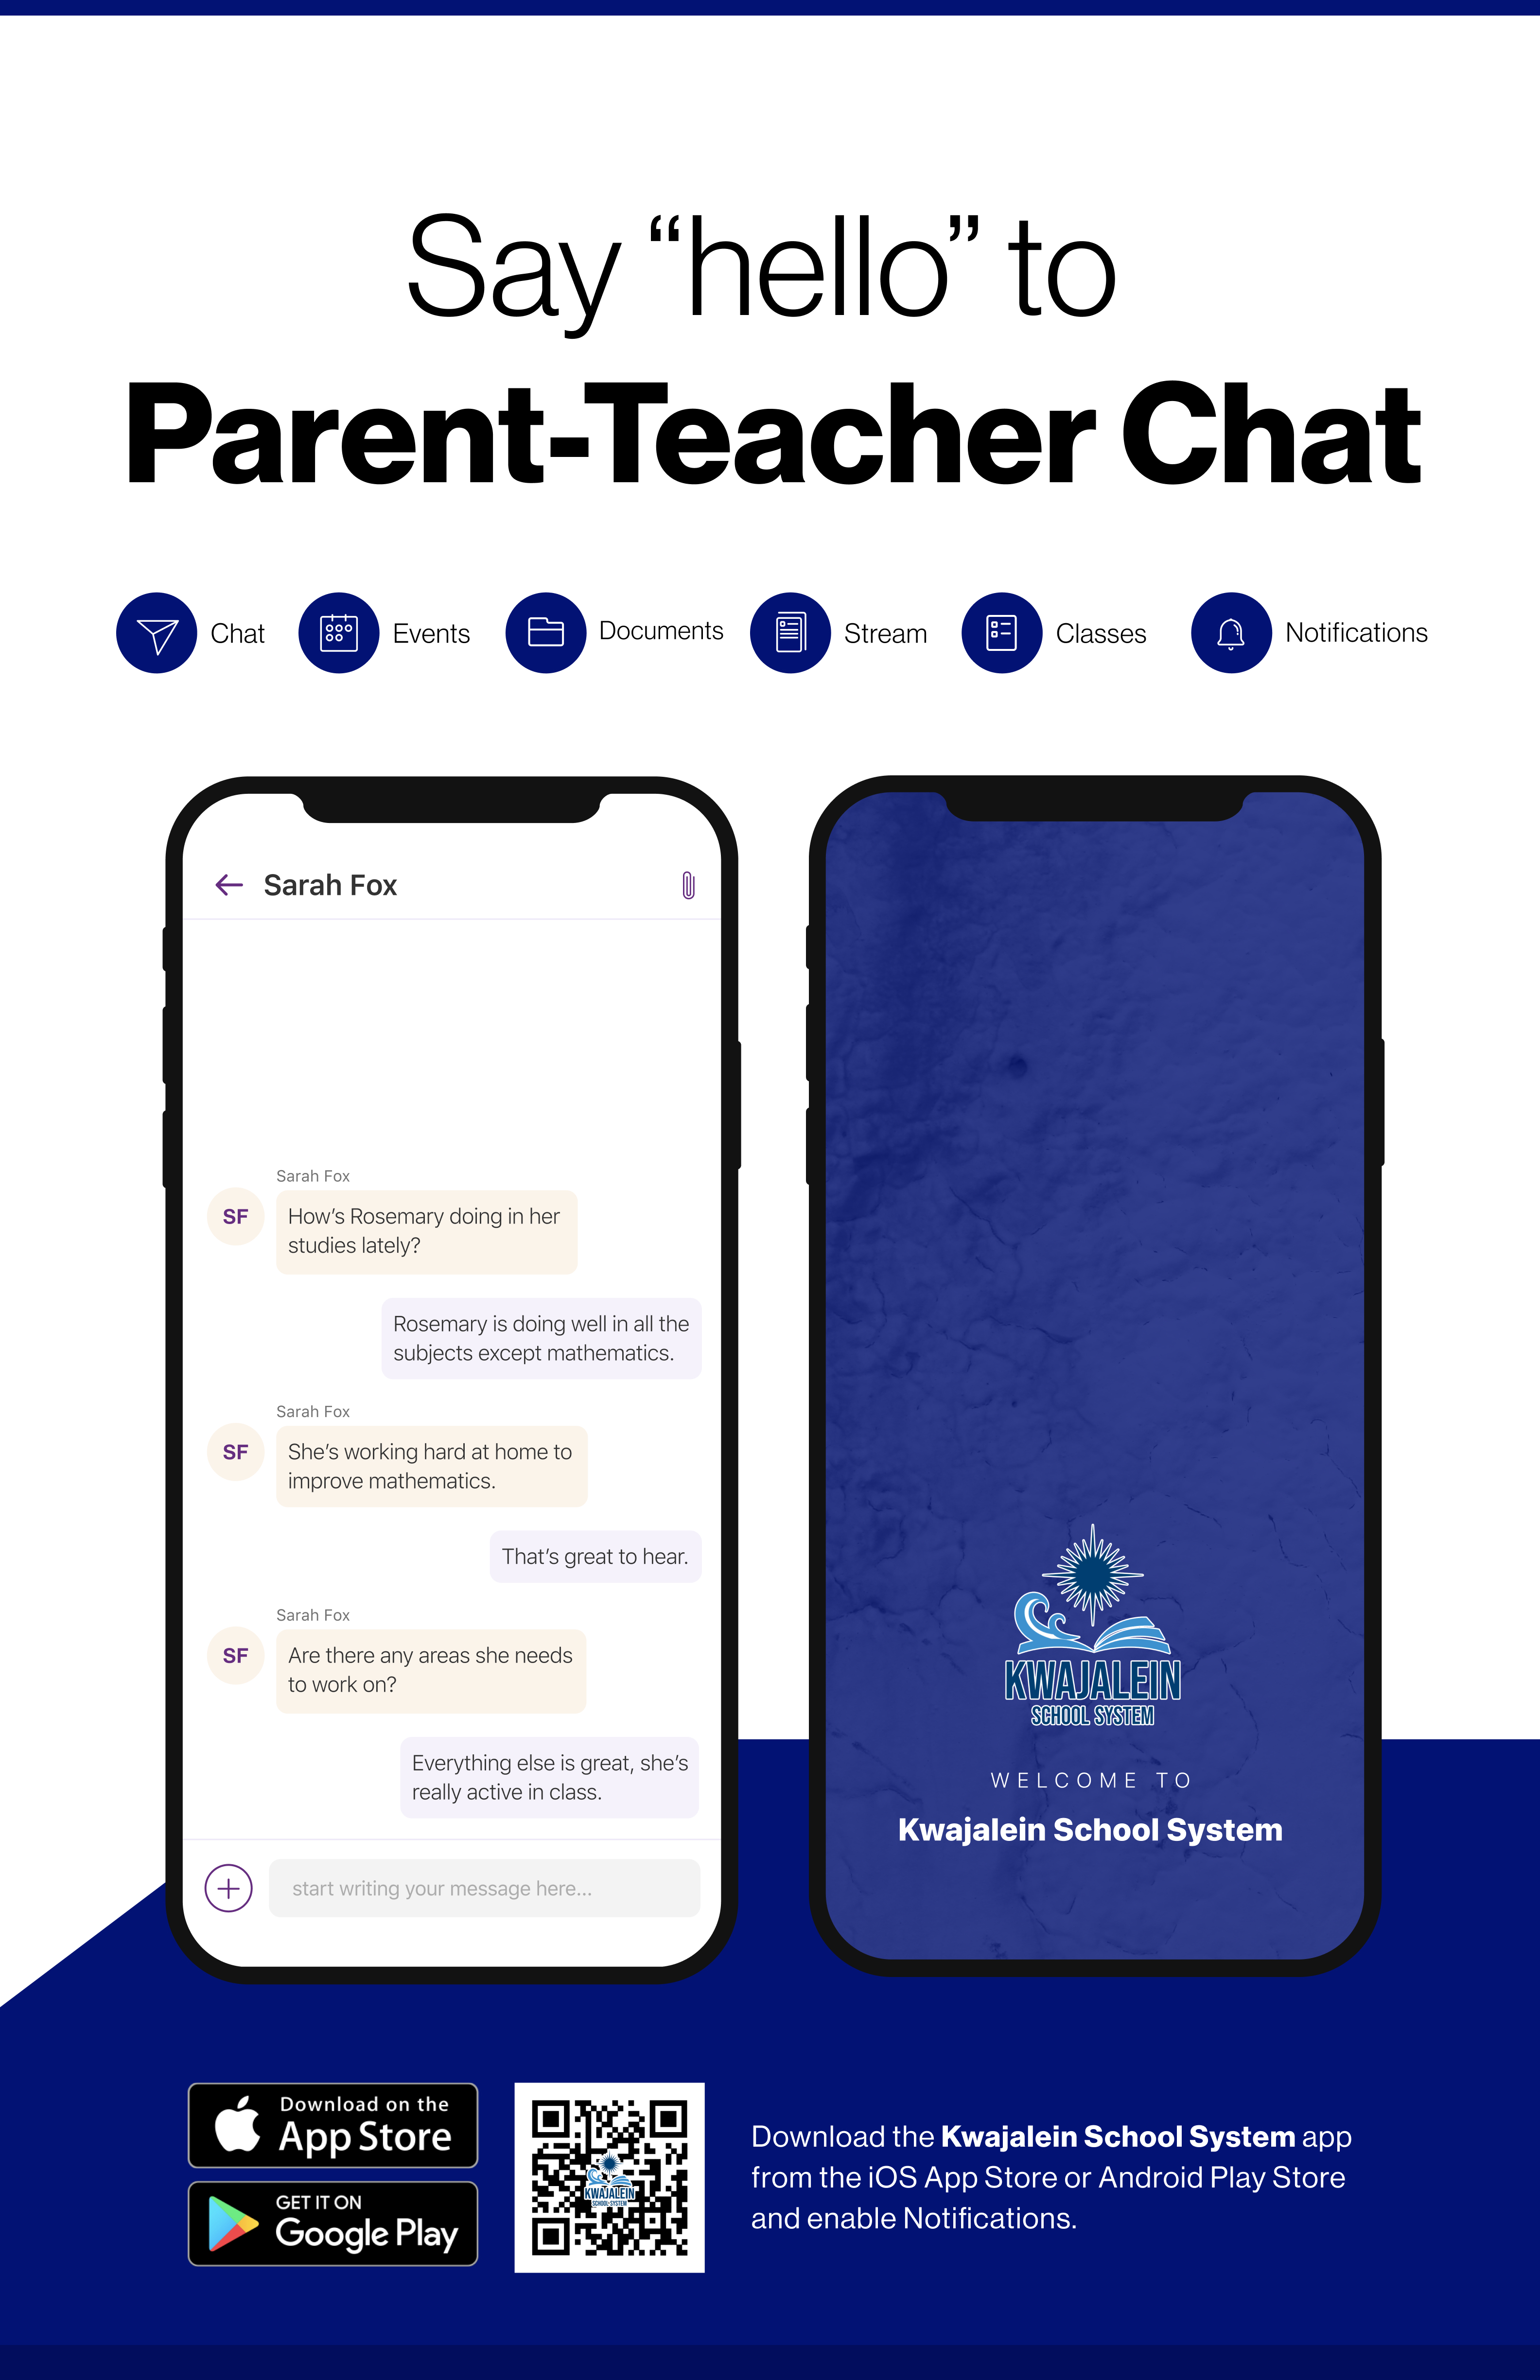 Say hello to Parent-Teacher chat in the new Rooms app. Download the Kwajalein School System app in the Google Play or Apple App store.